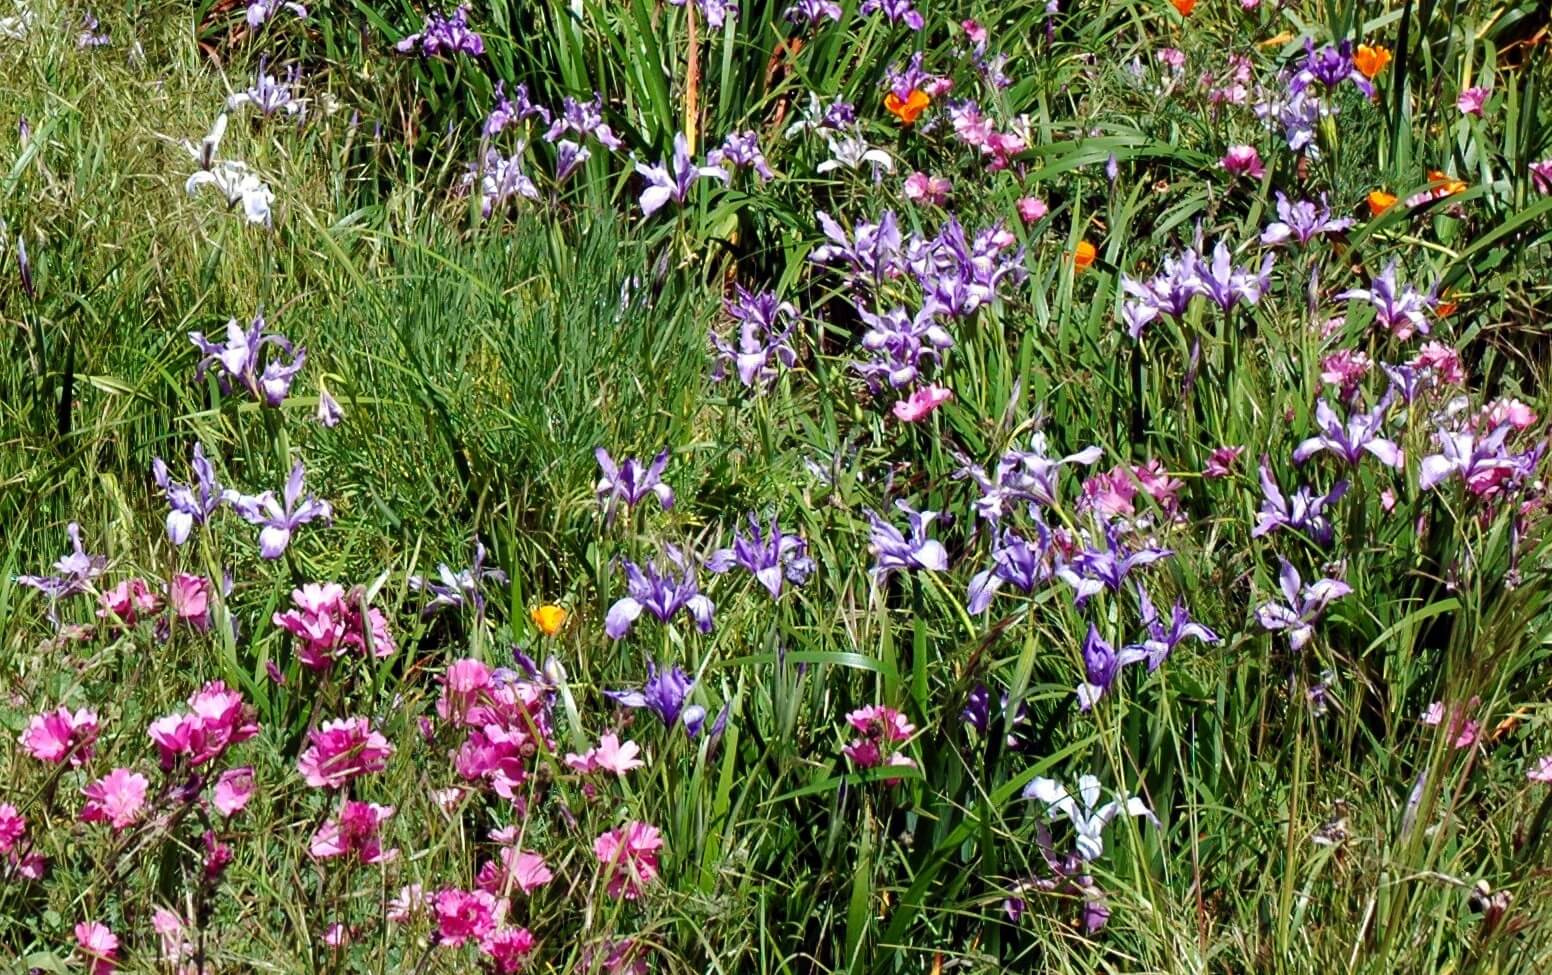 The native wildflower meadow at The San Francisco Botanical Garden. Photo: Pete Veilleux